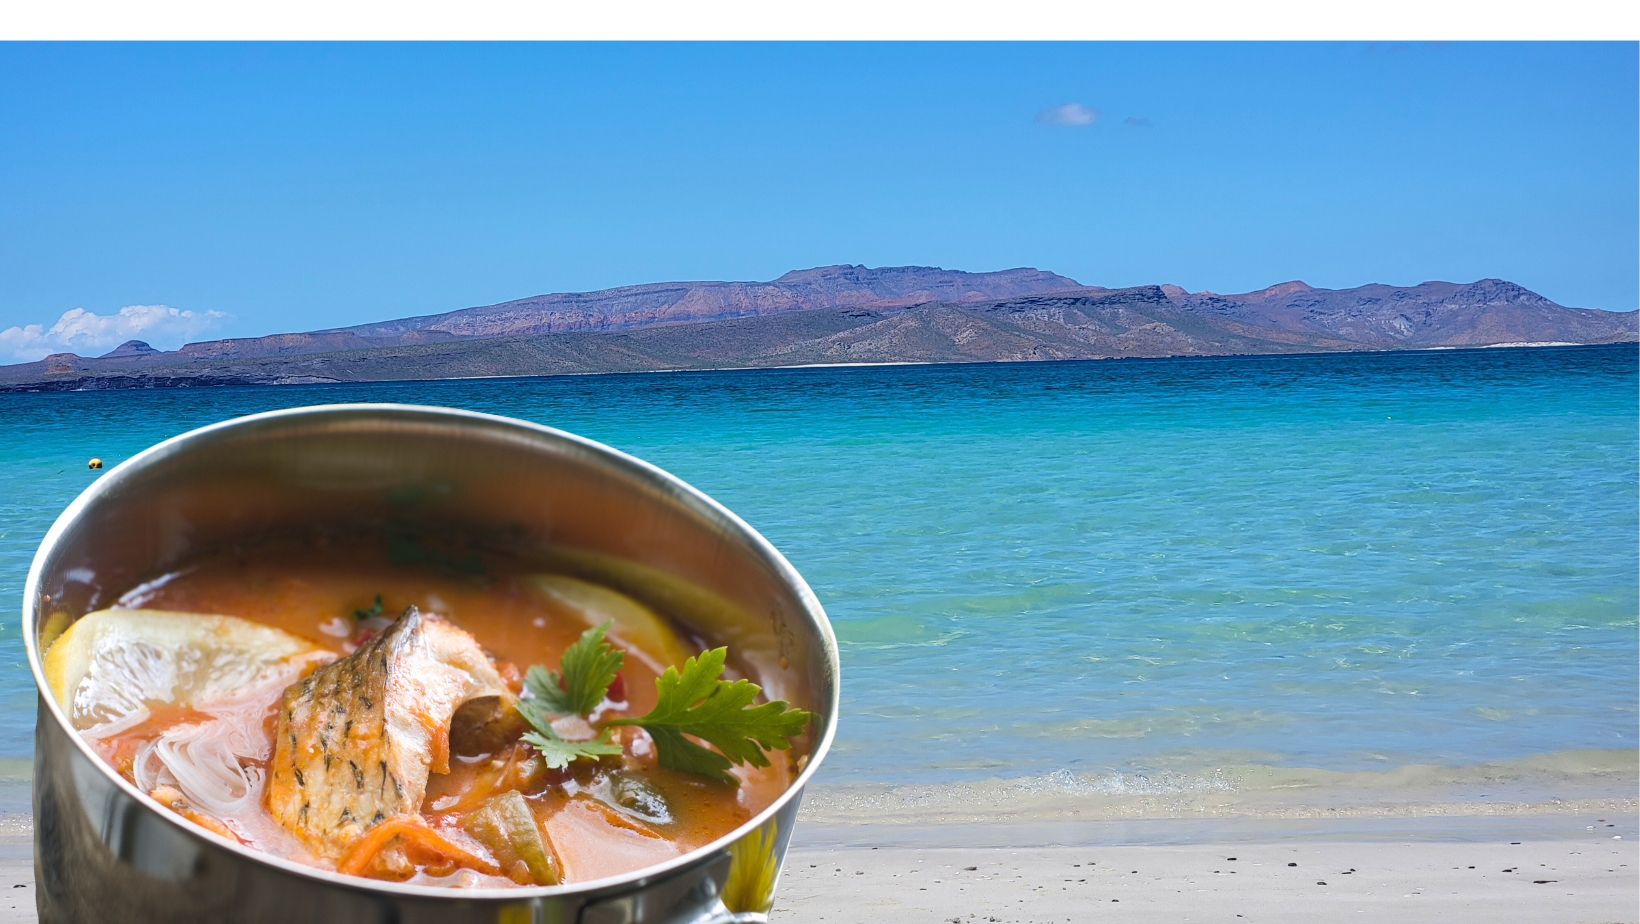 Fish soup in Playa El Tecolote La Paz Mexico - The Hungry Herald Food Travel Blog